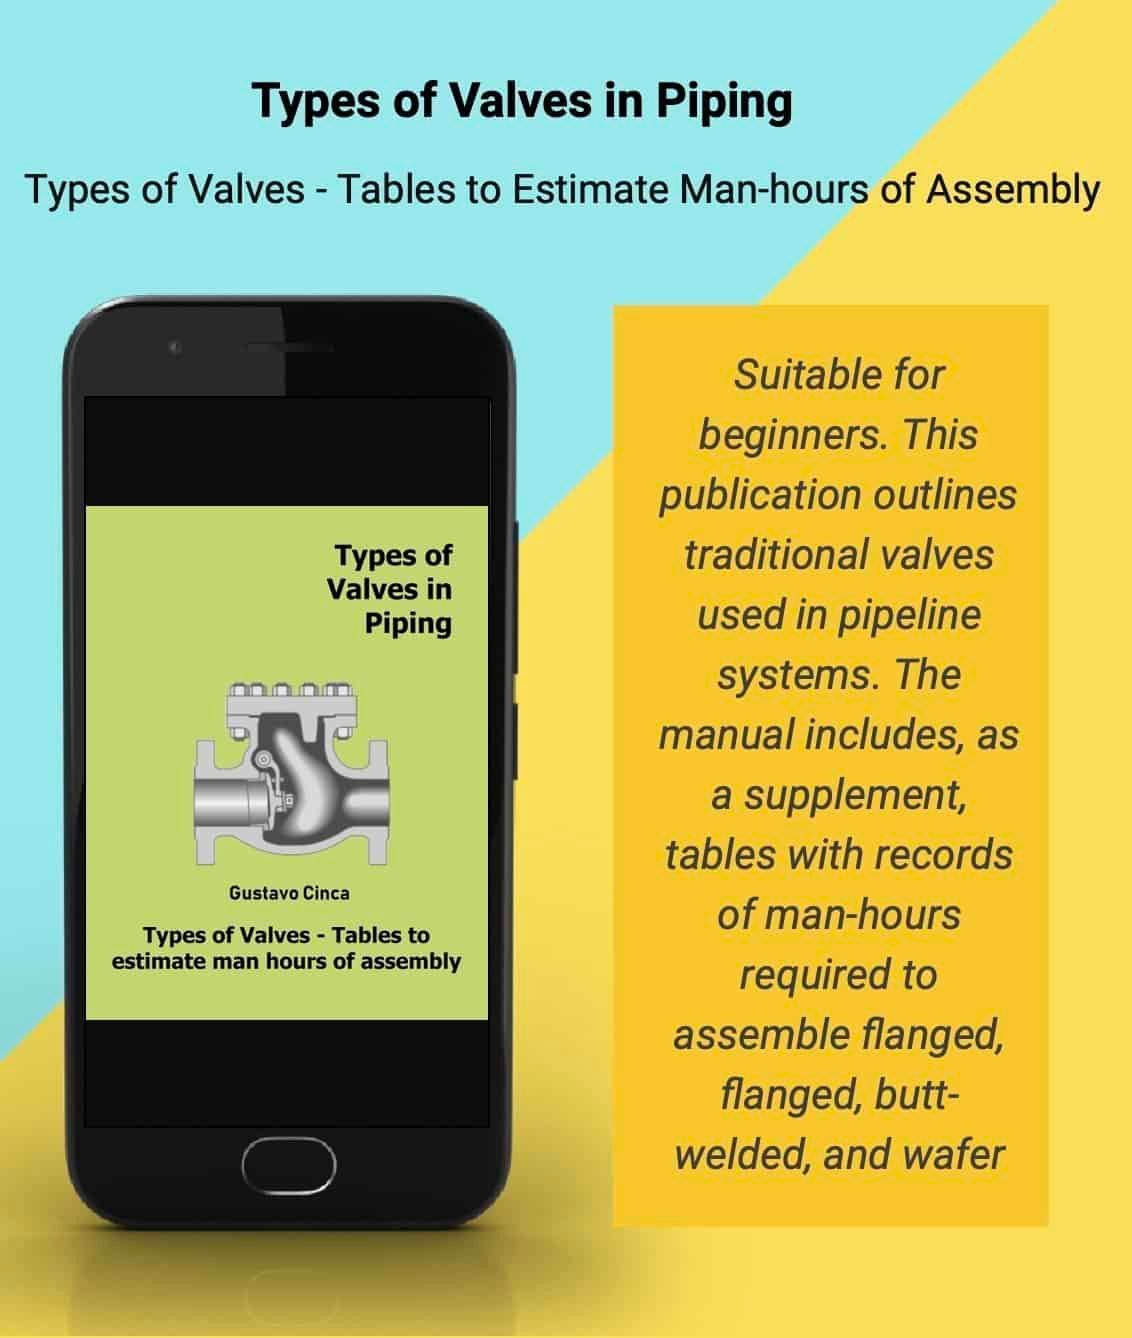 The figure displays a booklet with the cover and a brief description of the book: Types of Valves in Piping